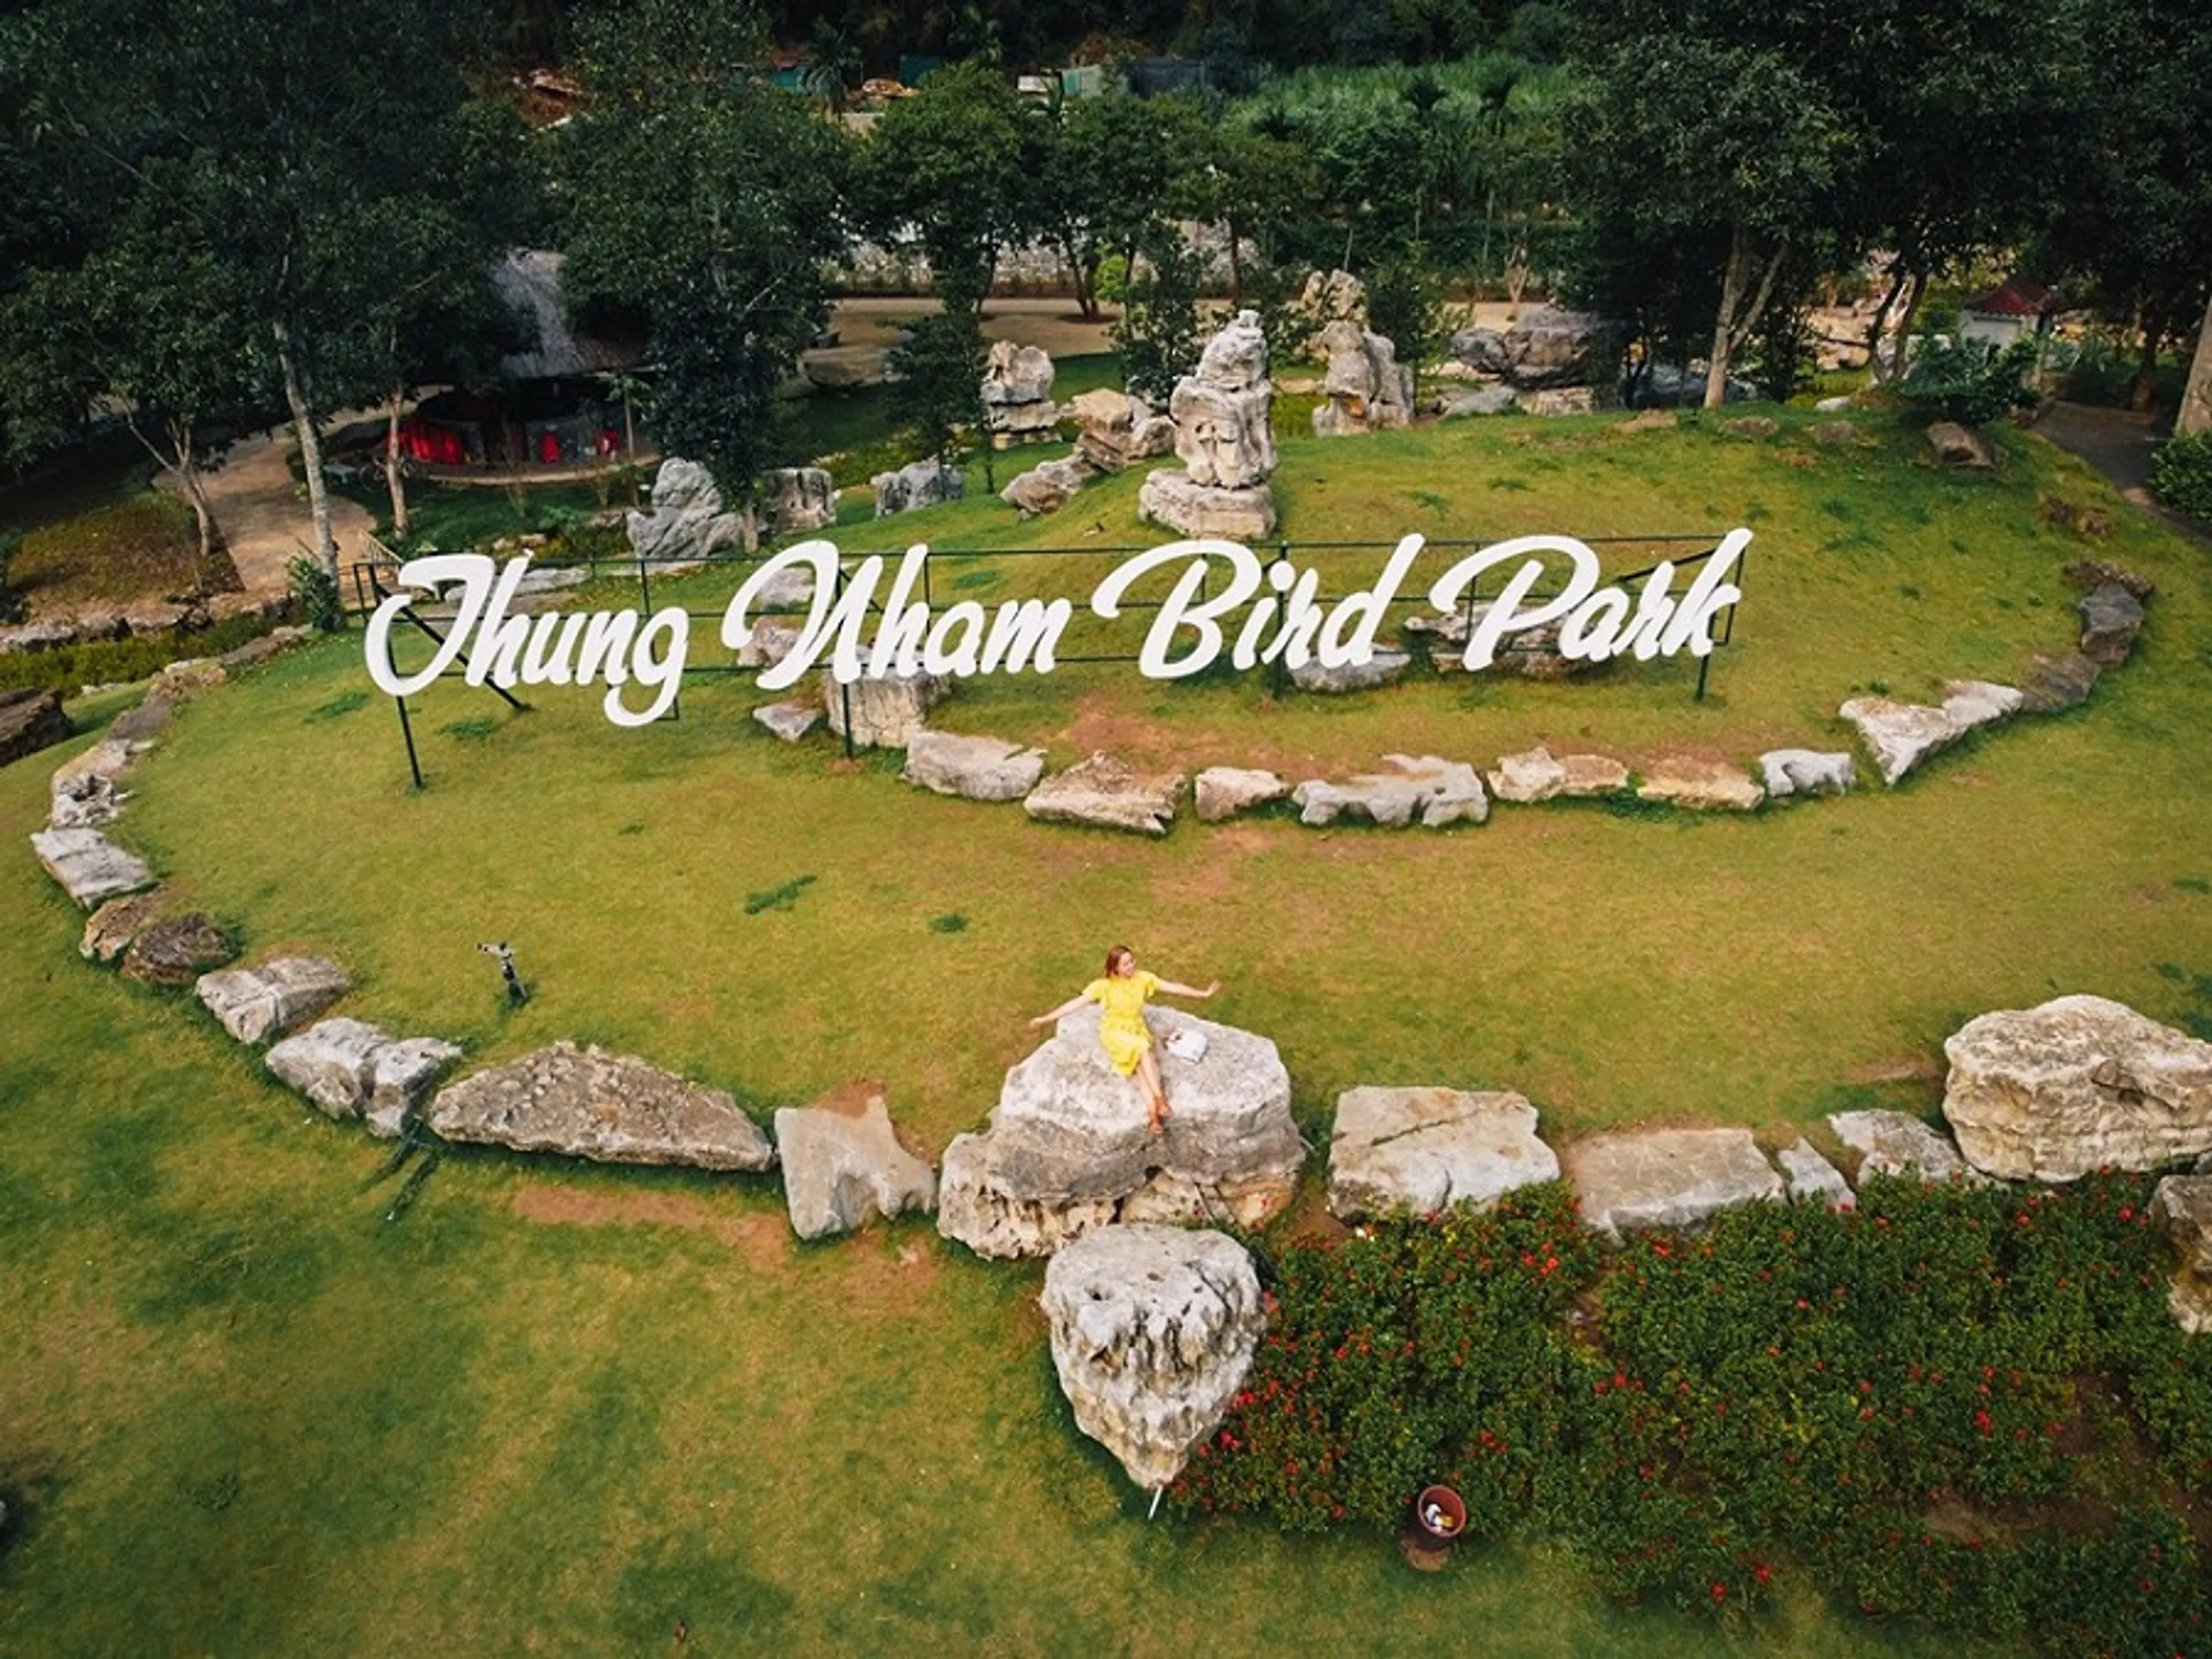 Thung Nham Bird Park: A “Colorful Picture” of Bird Species